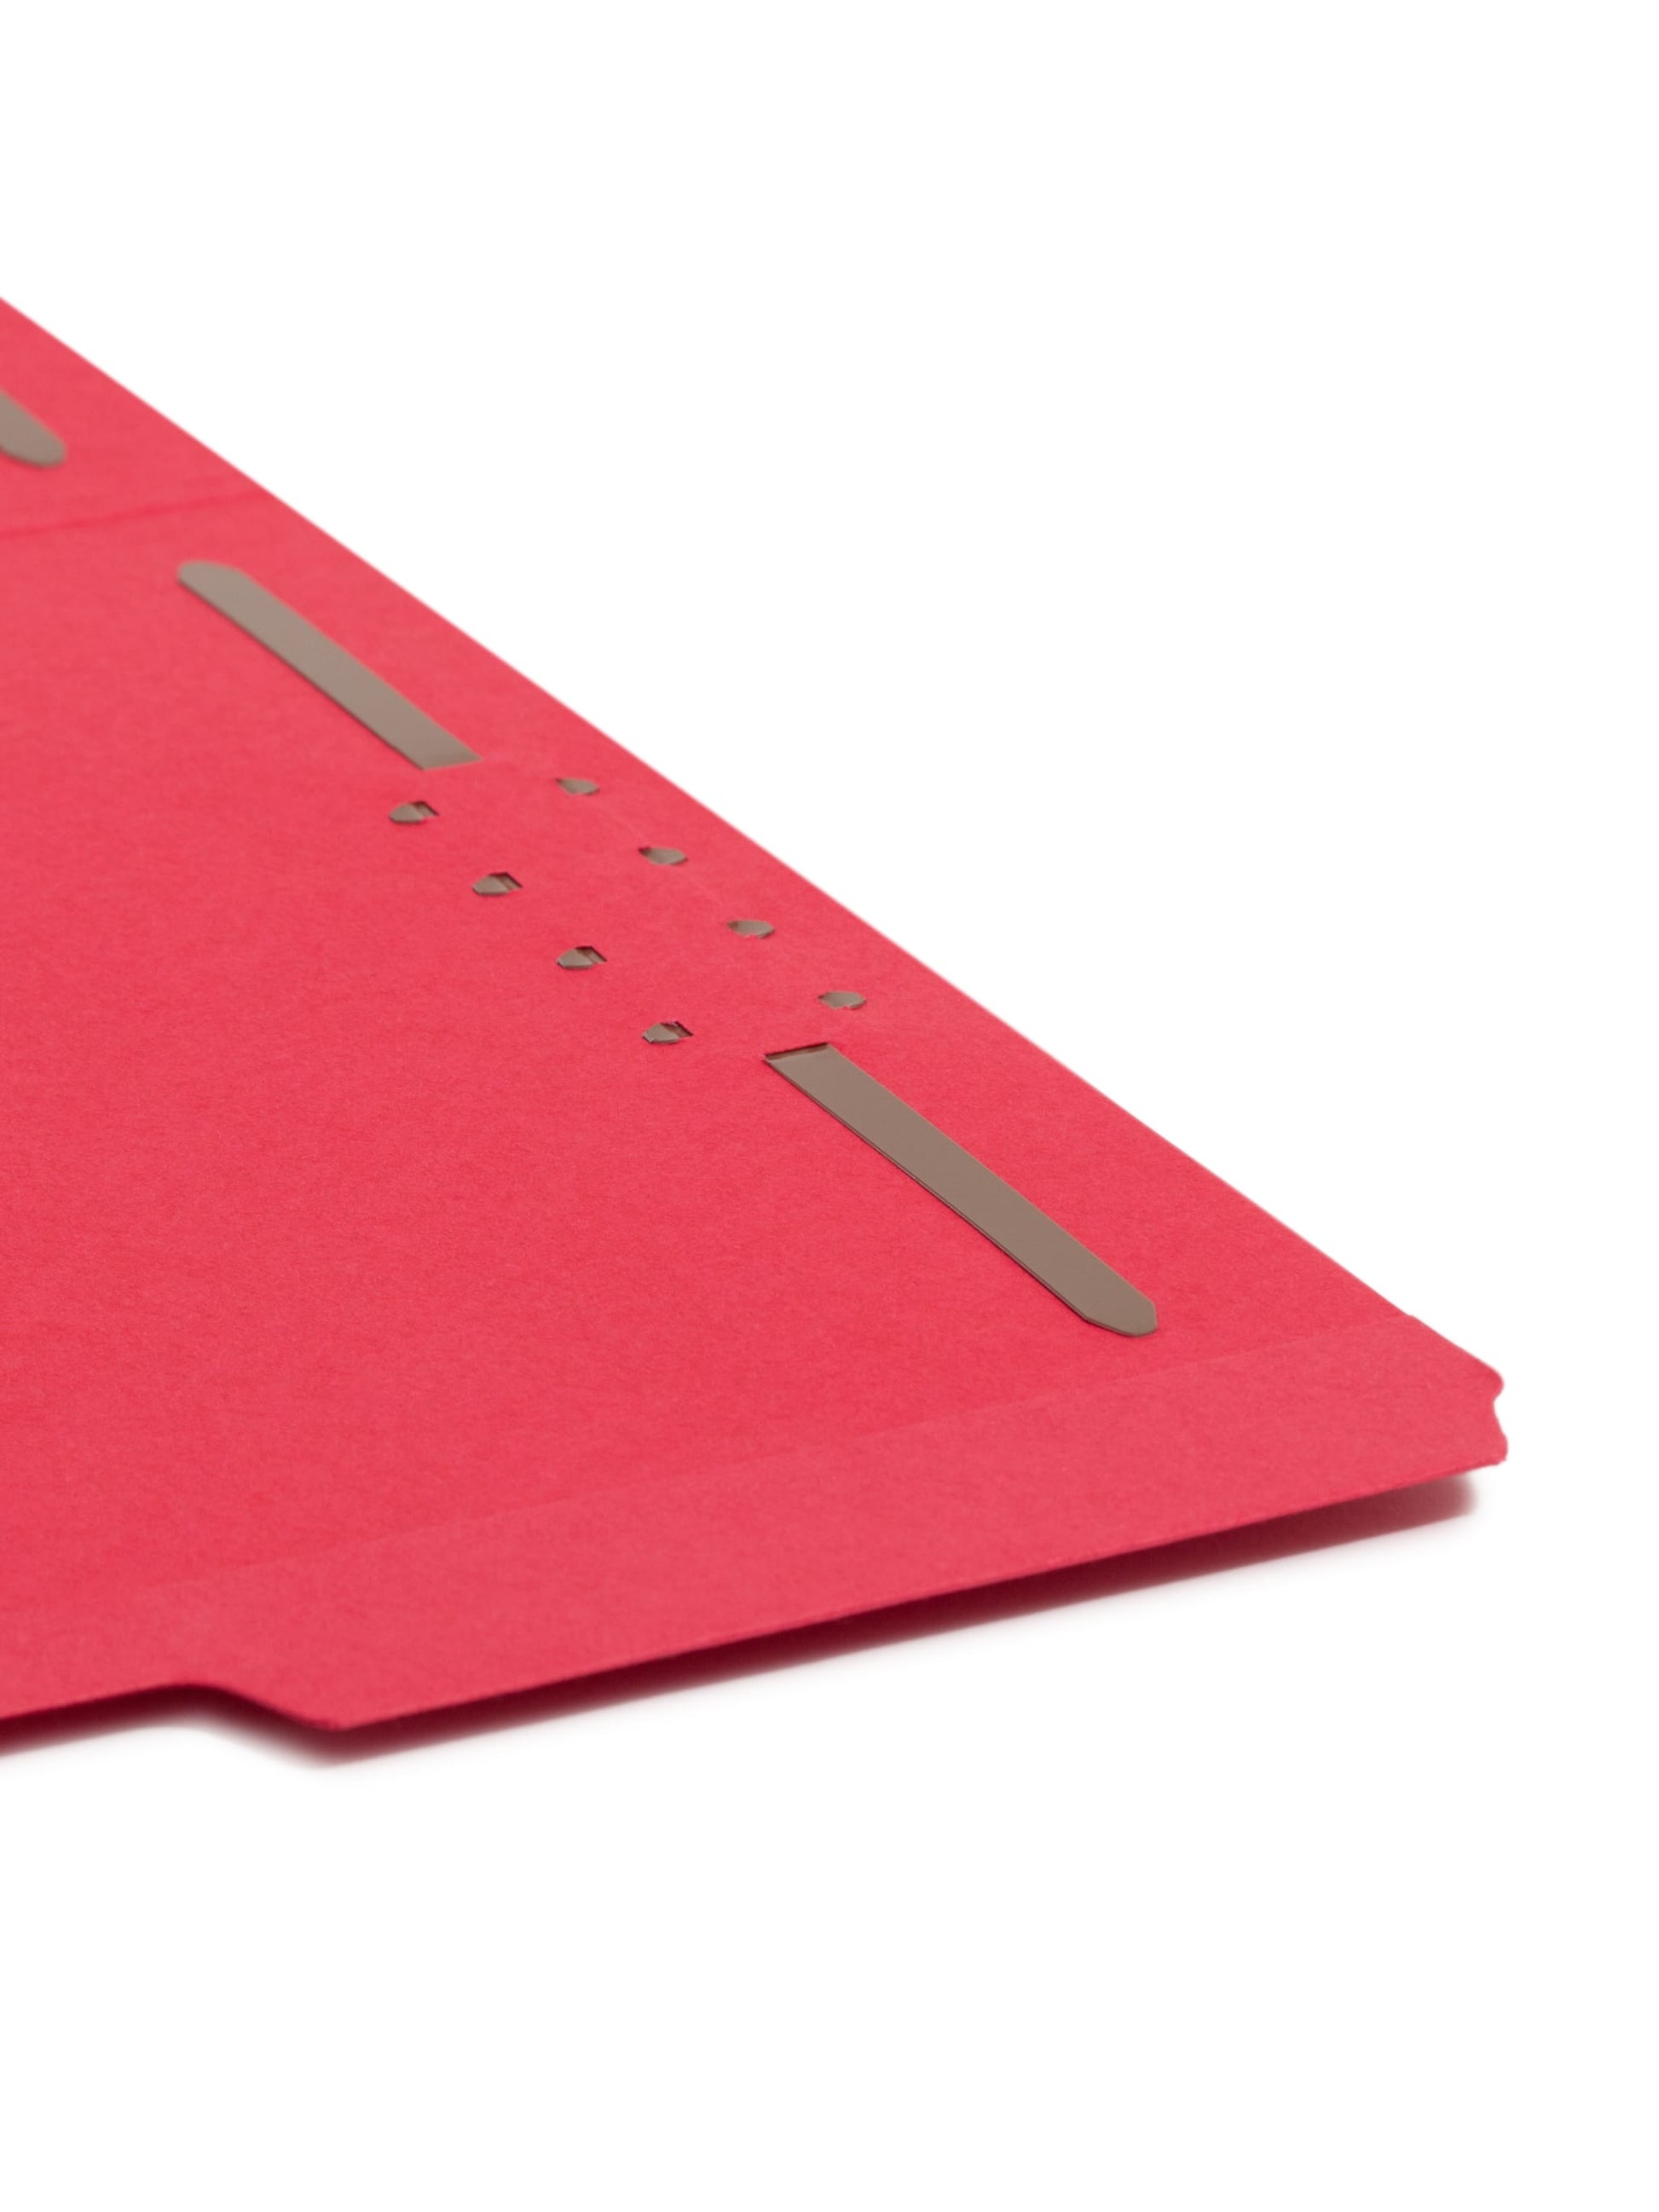 Reinforced Tab Fastener File Folders, 1/3-Cut Tab, 2 Fasteners, Red Color, Letter Size, Set of 50, 086486127400